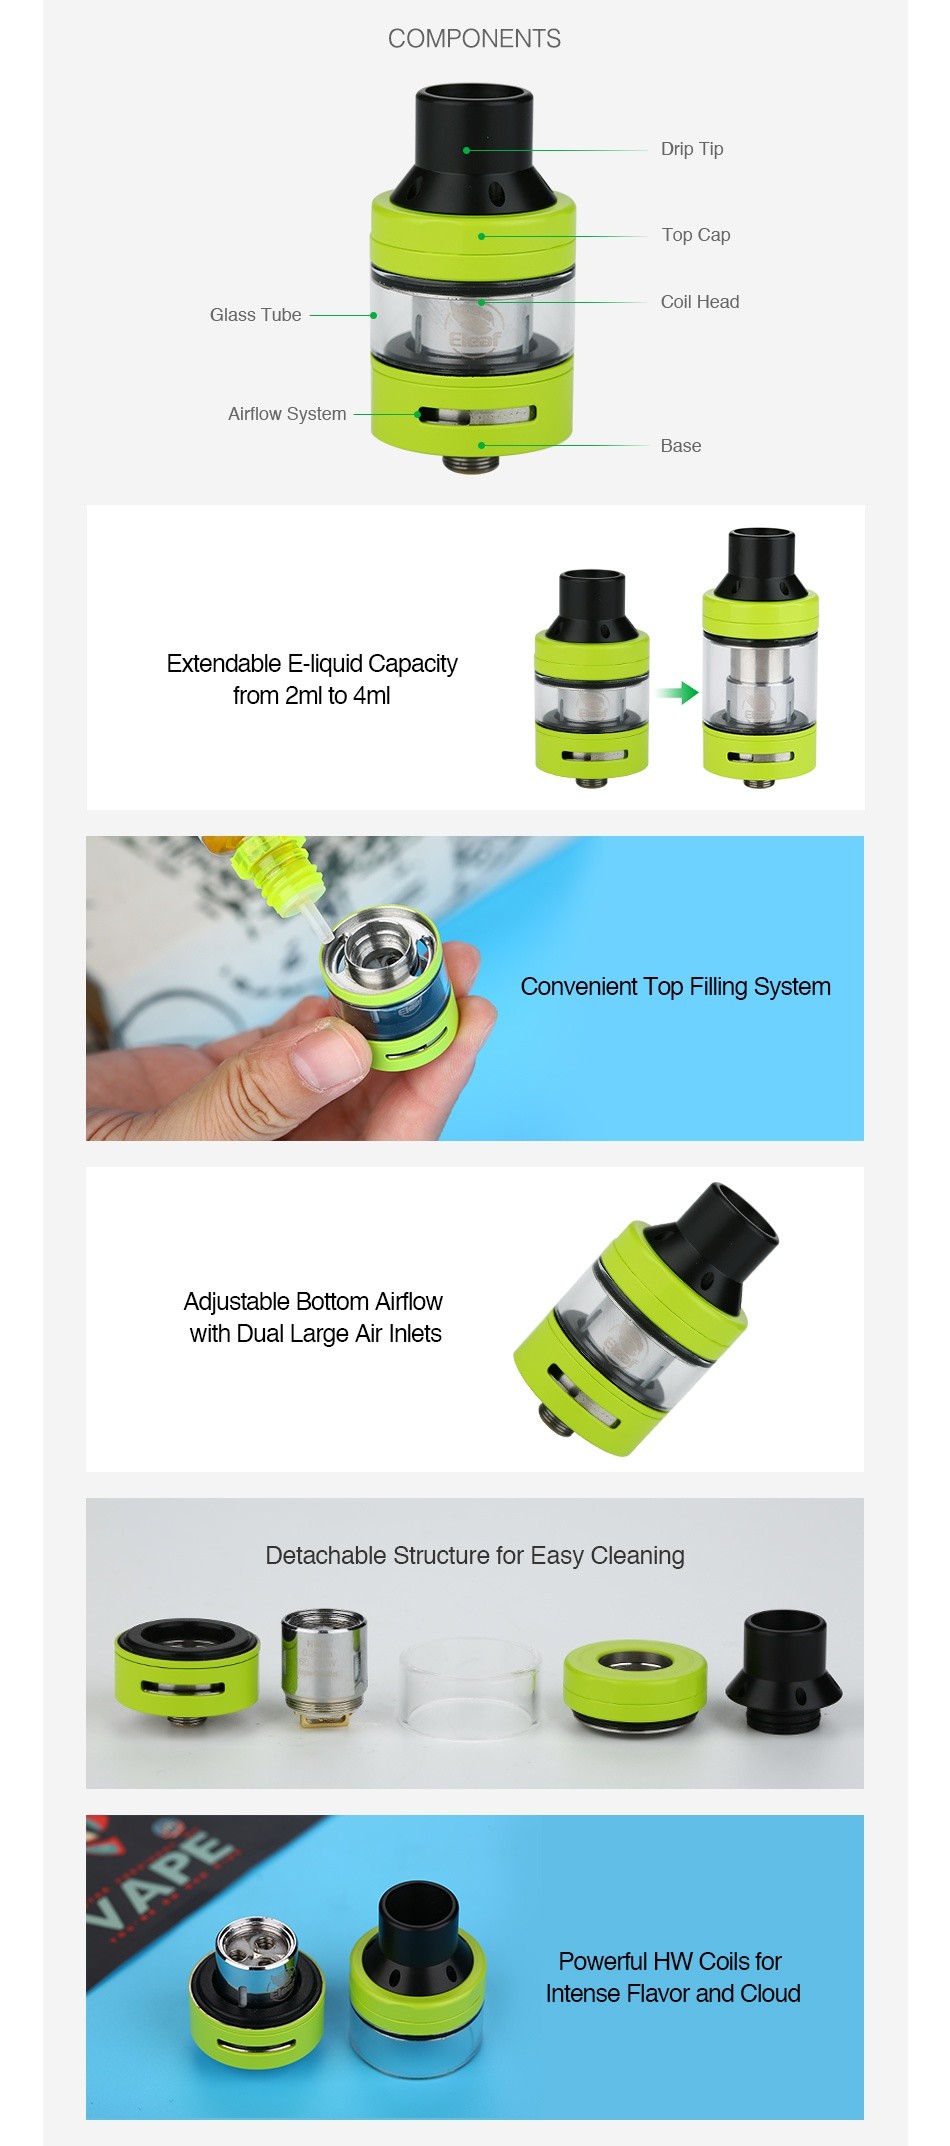 Eleaf ELLO T Atomizer 2ml COMPONENTS Drip T ip Top Cap Coil head Glass Tube Airflow System EXtendable E liquid capacity from 2ml to 4ml Convenient Top Filling System Adjustable Bottom Airflow with Dual Large Air Inlets Detachable Structure for Easy Cleaning Powerful HW coils for Intense Flavor and cloud